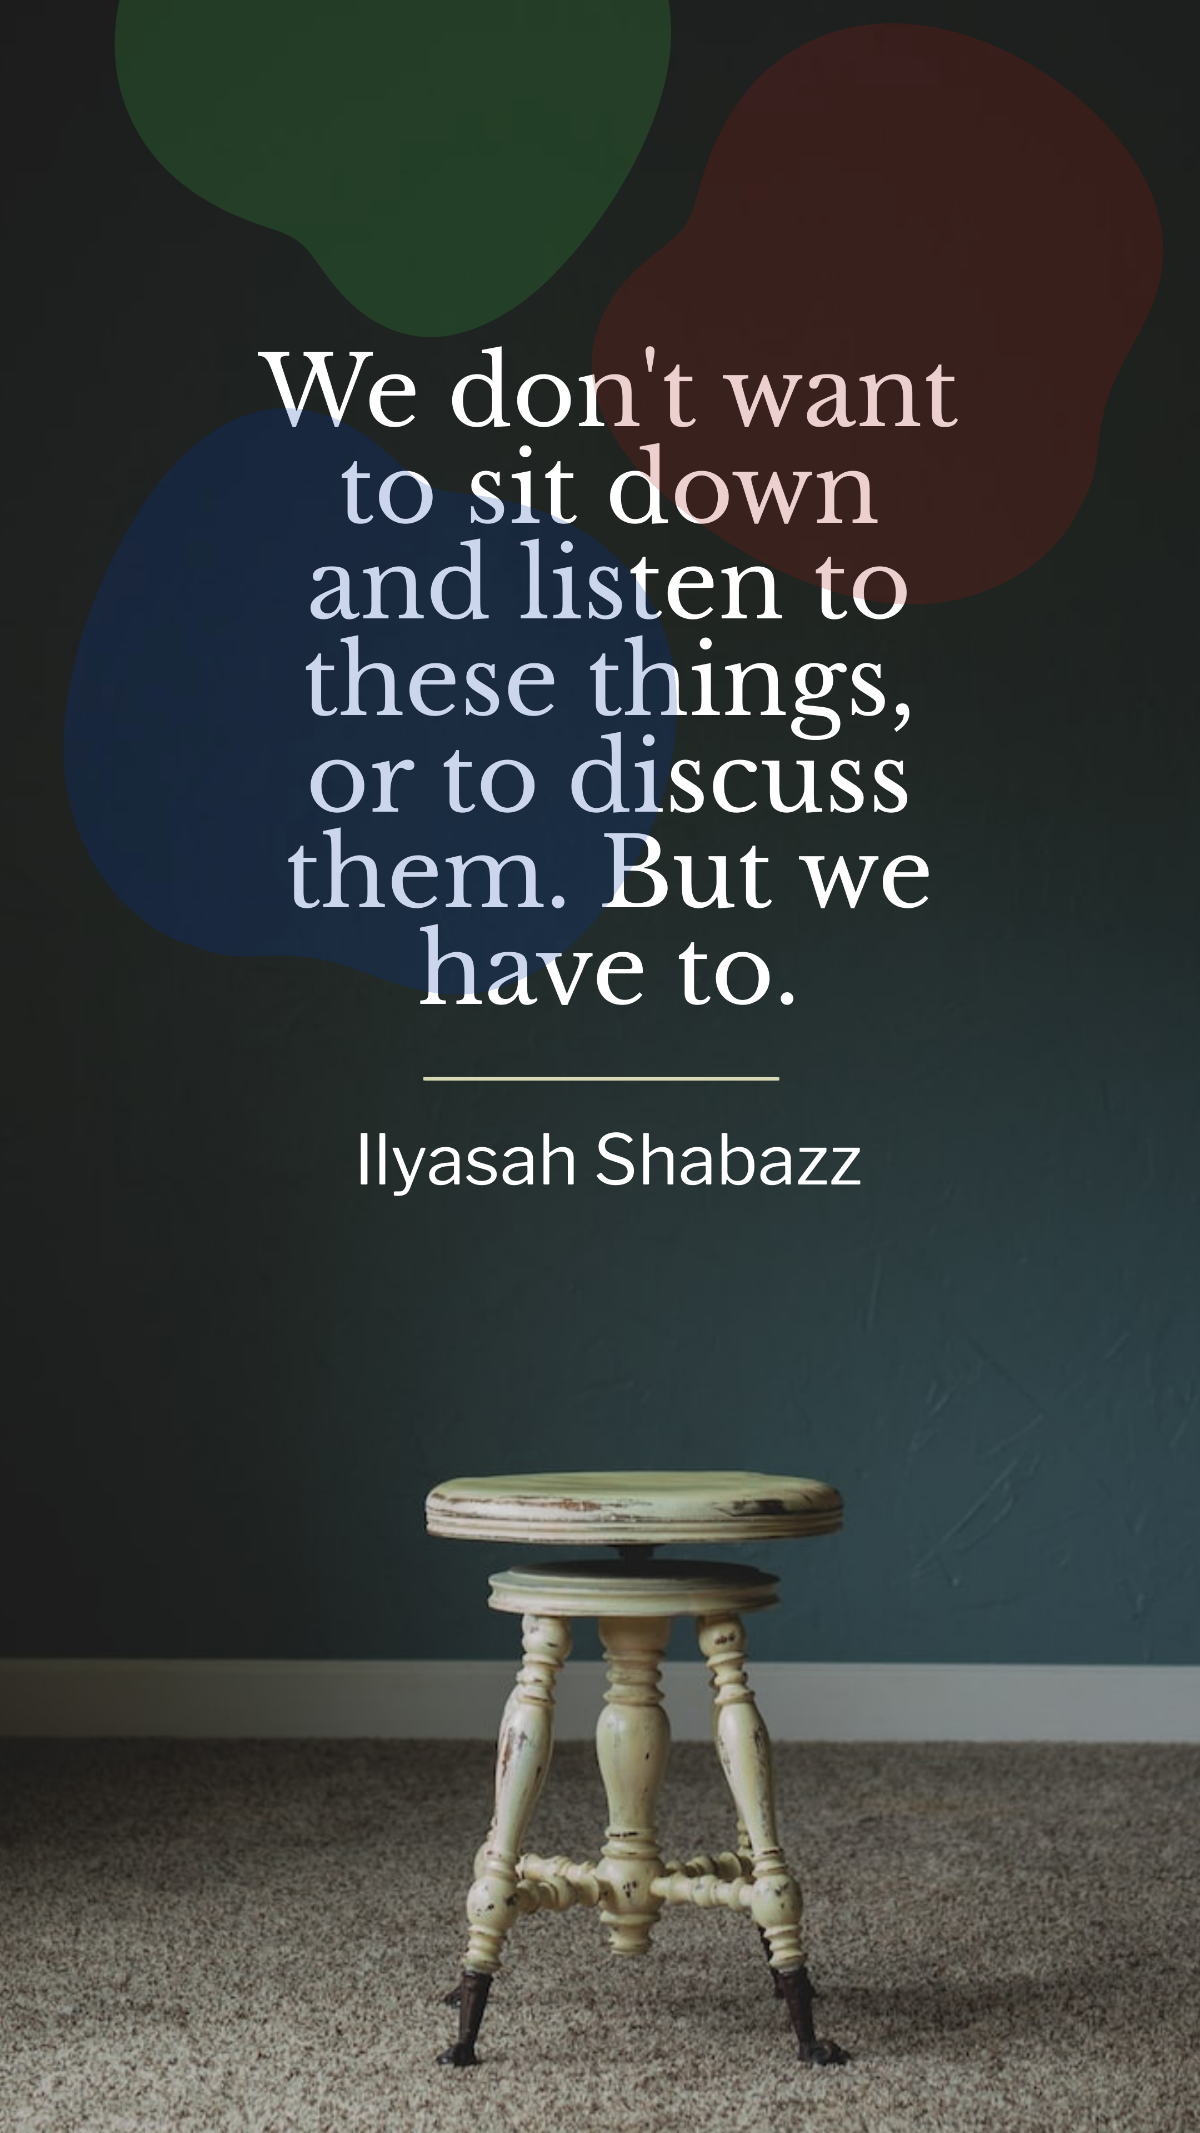 Ilyasah Shabazz  - We don't want to sit down and listen to these things, or to discuss them. But we have to.